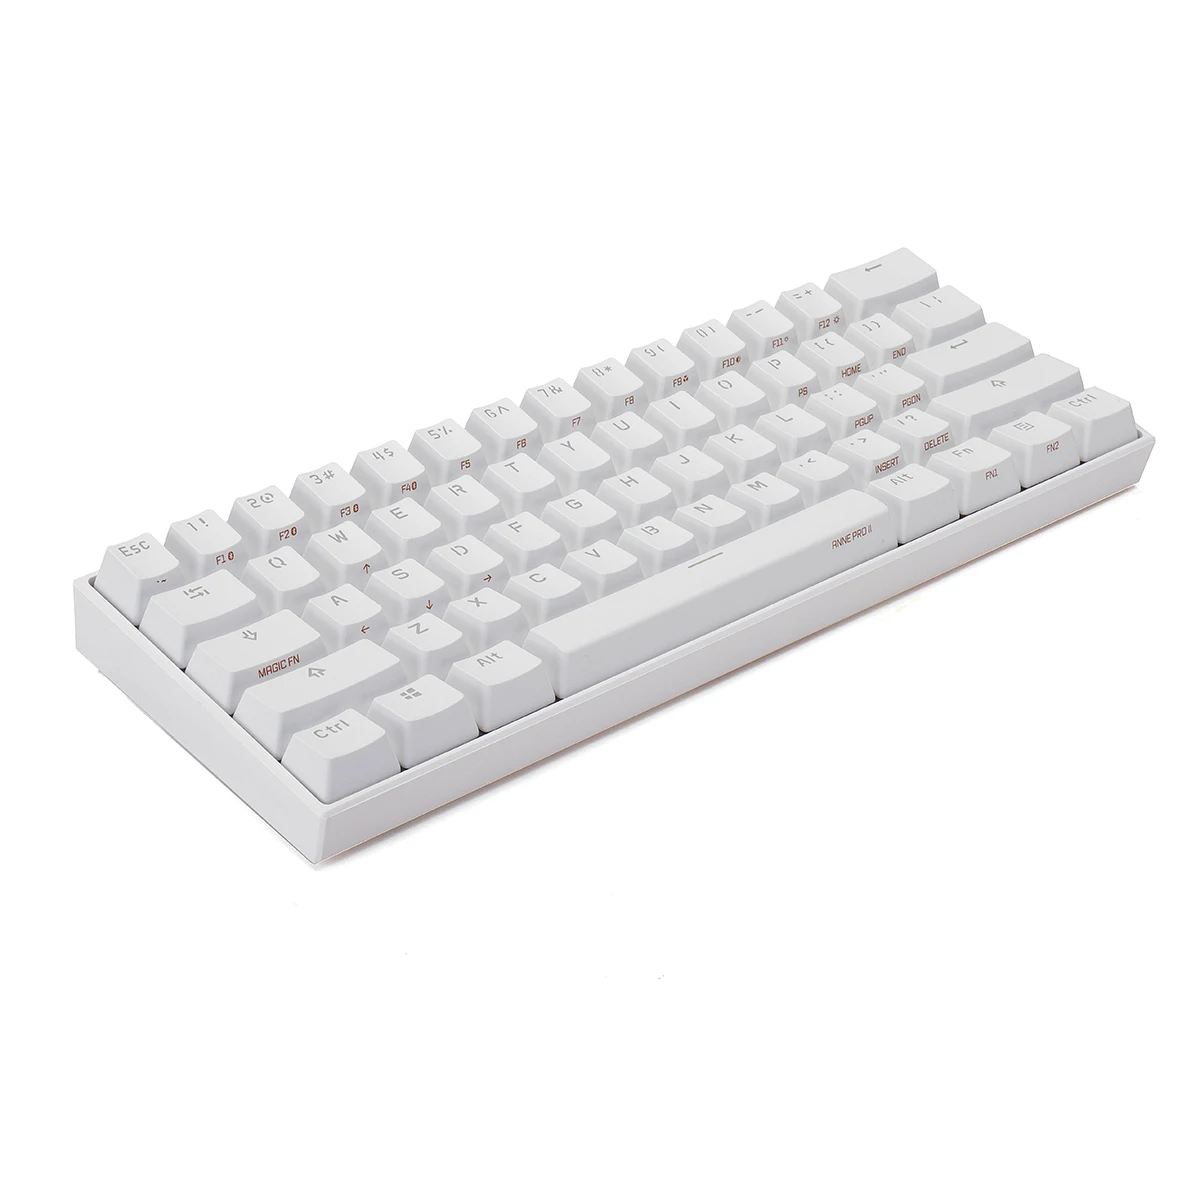 Buy  ANNE Pro2 Mini Portable Wireless bluetooth 60% Mechanical Keyboard Red Blue Brown Switch Gaming Key